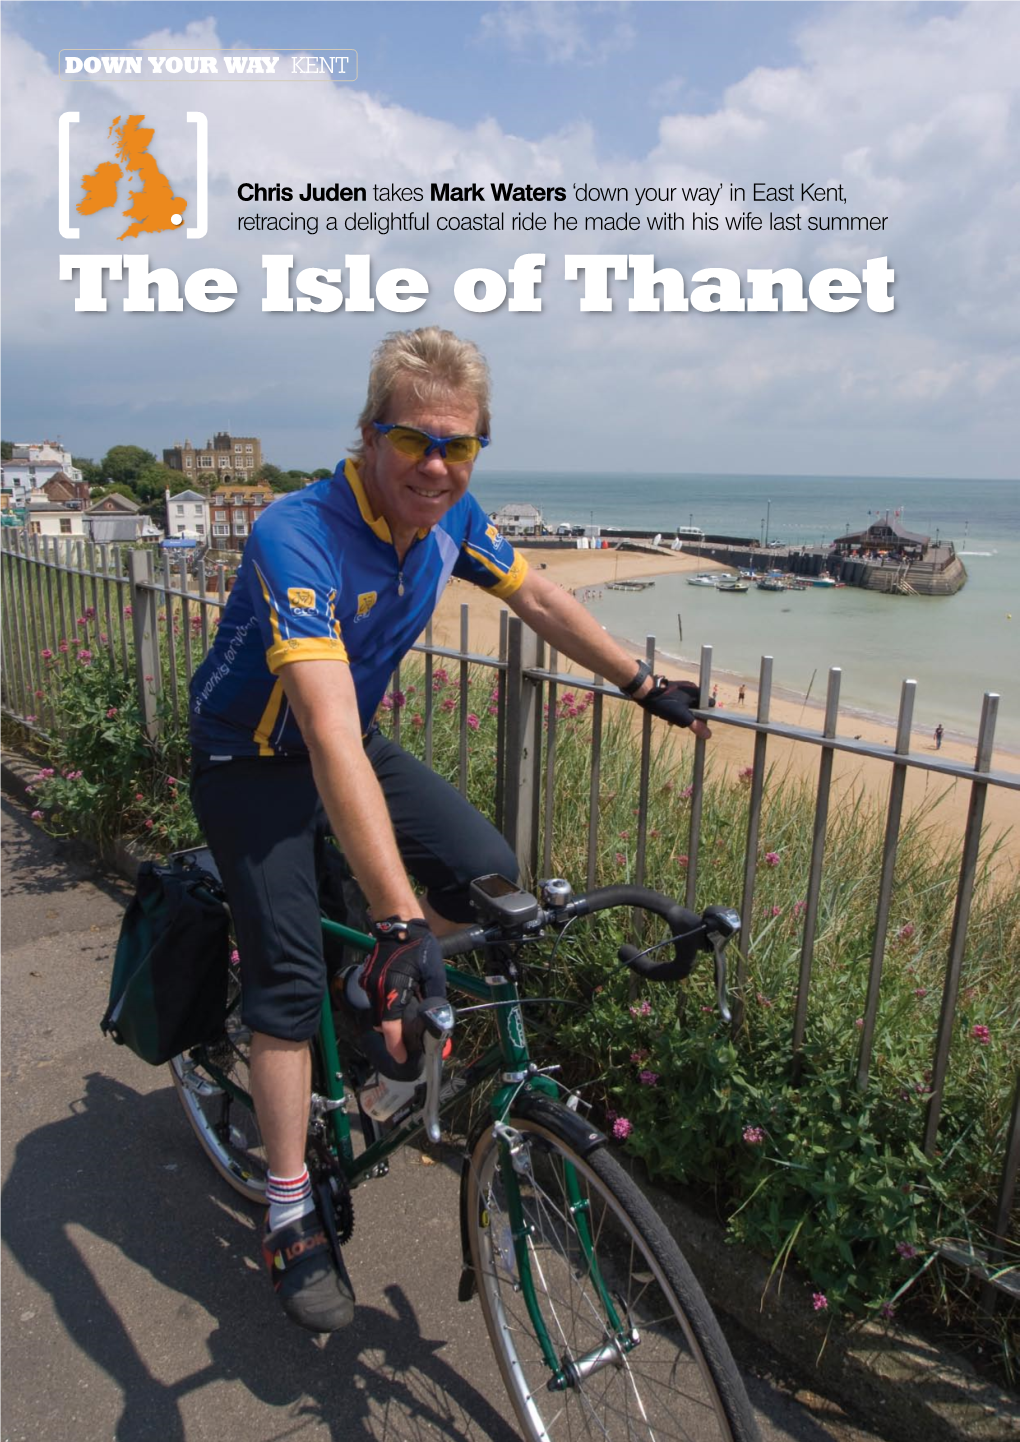 The Isle of Thanet